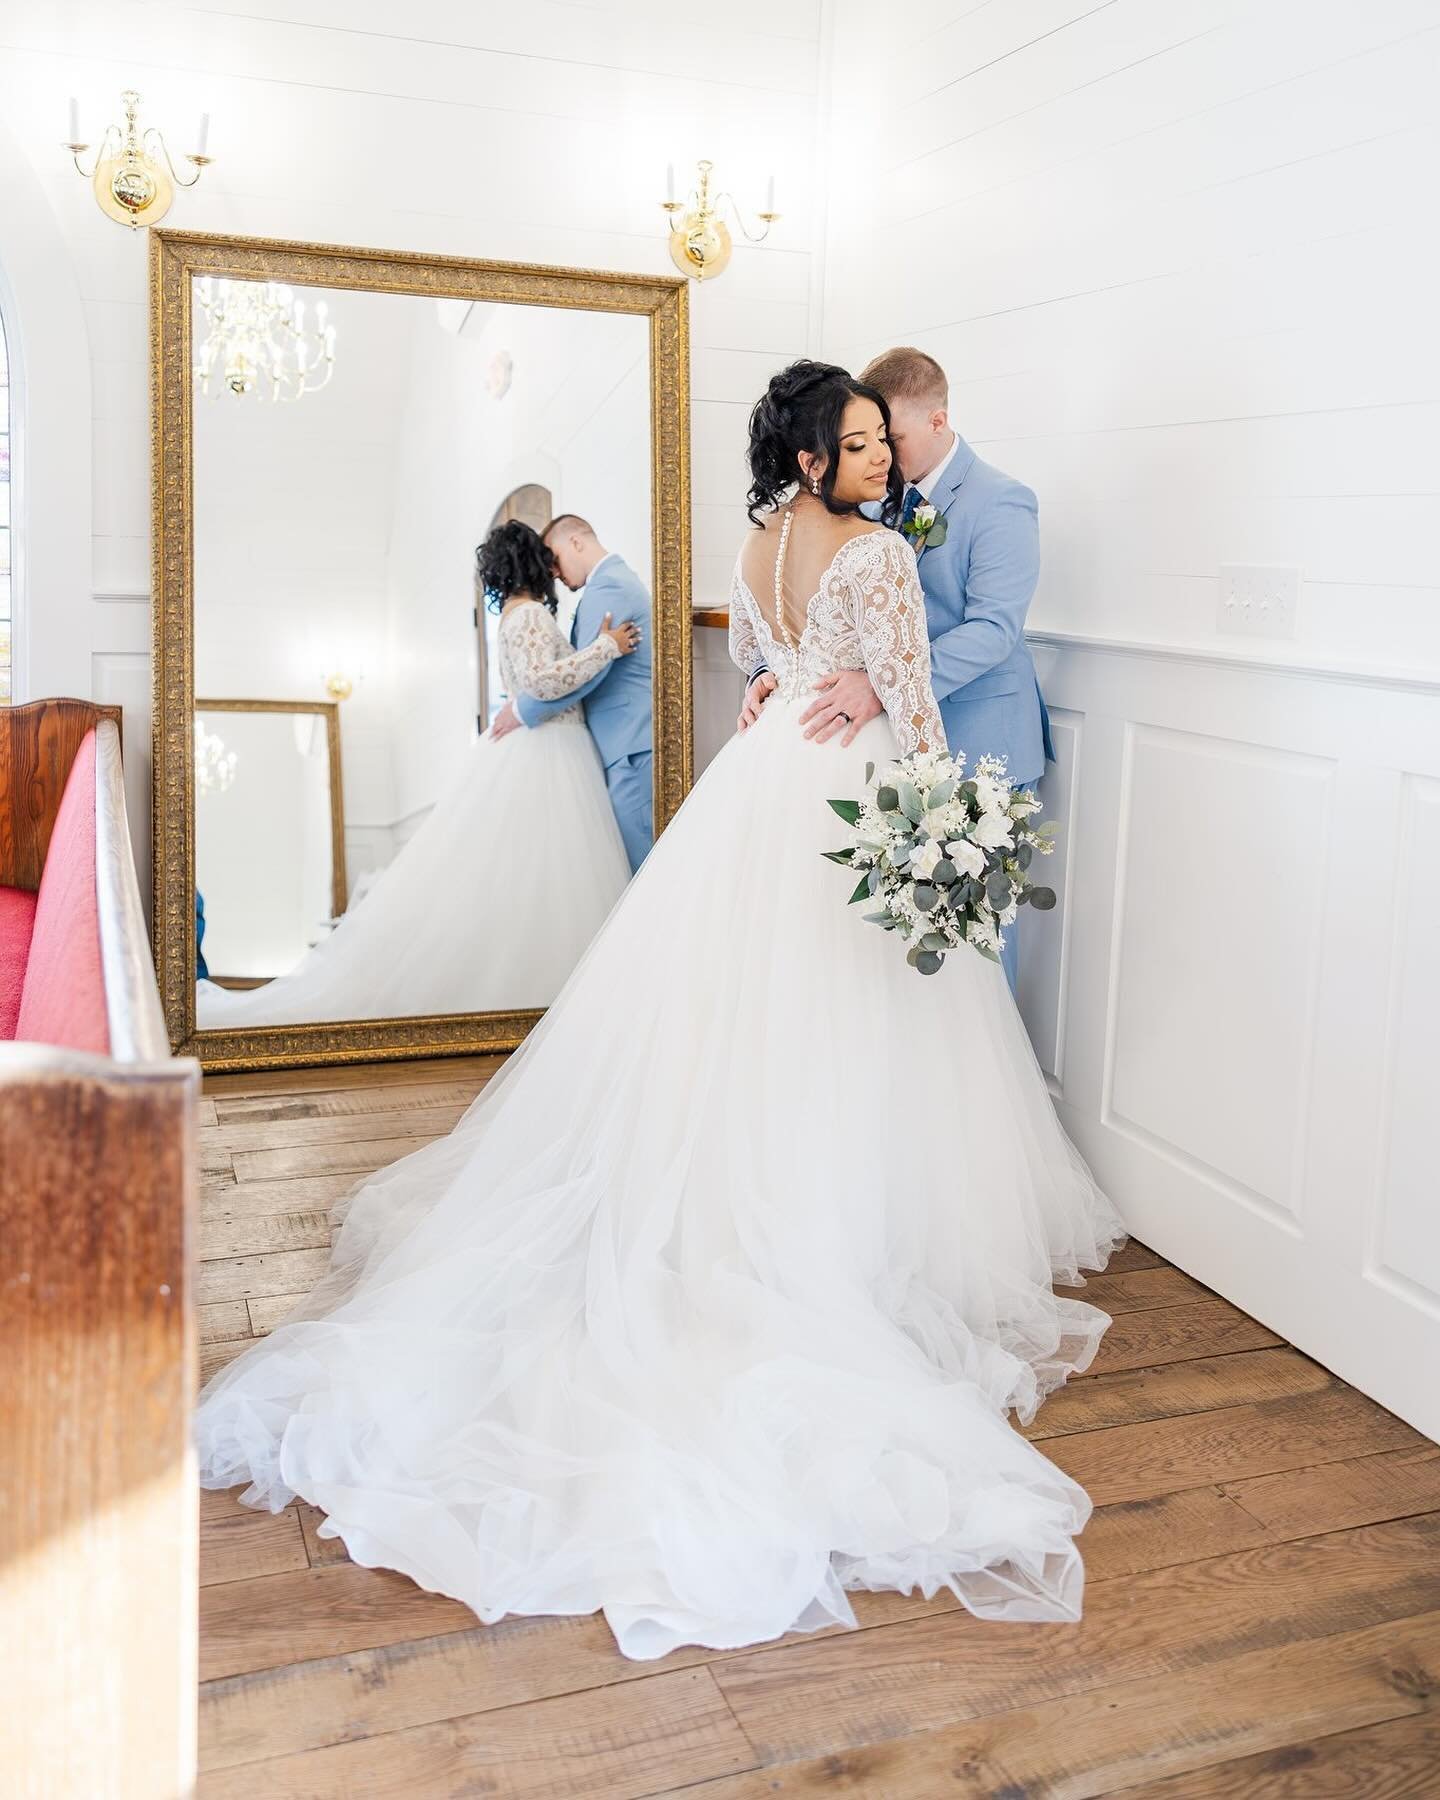 Picture-perfect moments await at White Oak Manor. From our enchanting outdoor ceremony spaces to our elegant indoor options and reception barn, every corner is crafted to make your special day unforgettable. Schedule a tour today and start planning y